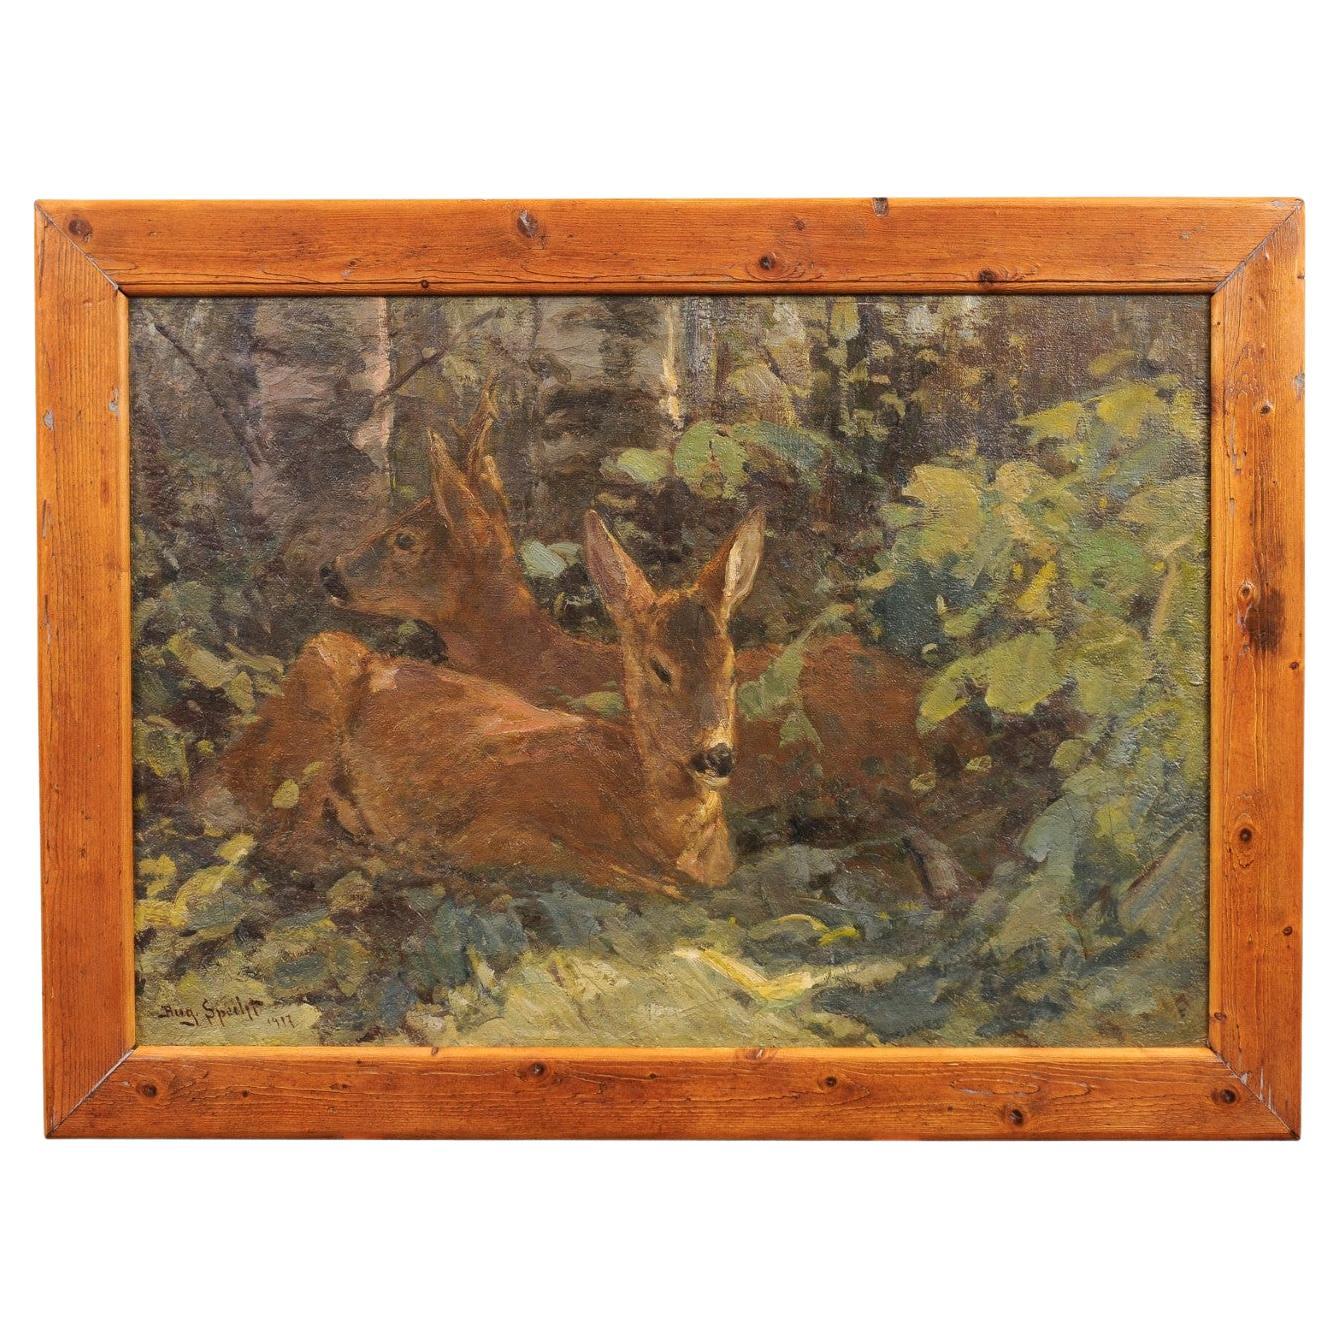 August Specht 1917 Oil Painting Titled Deer in the Woods in Old Fir Tree Frame For Sale